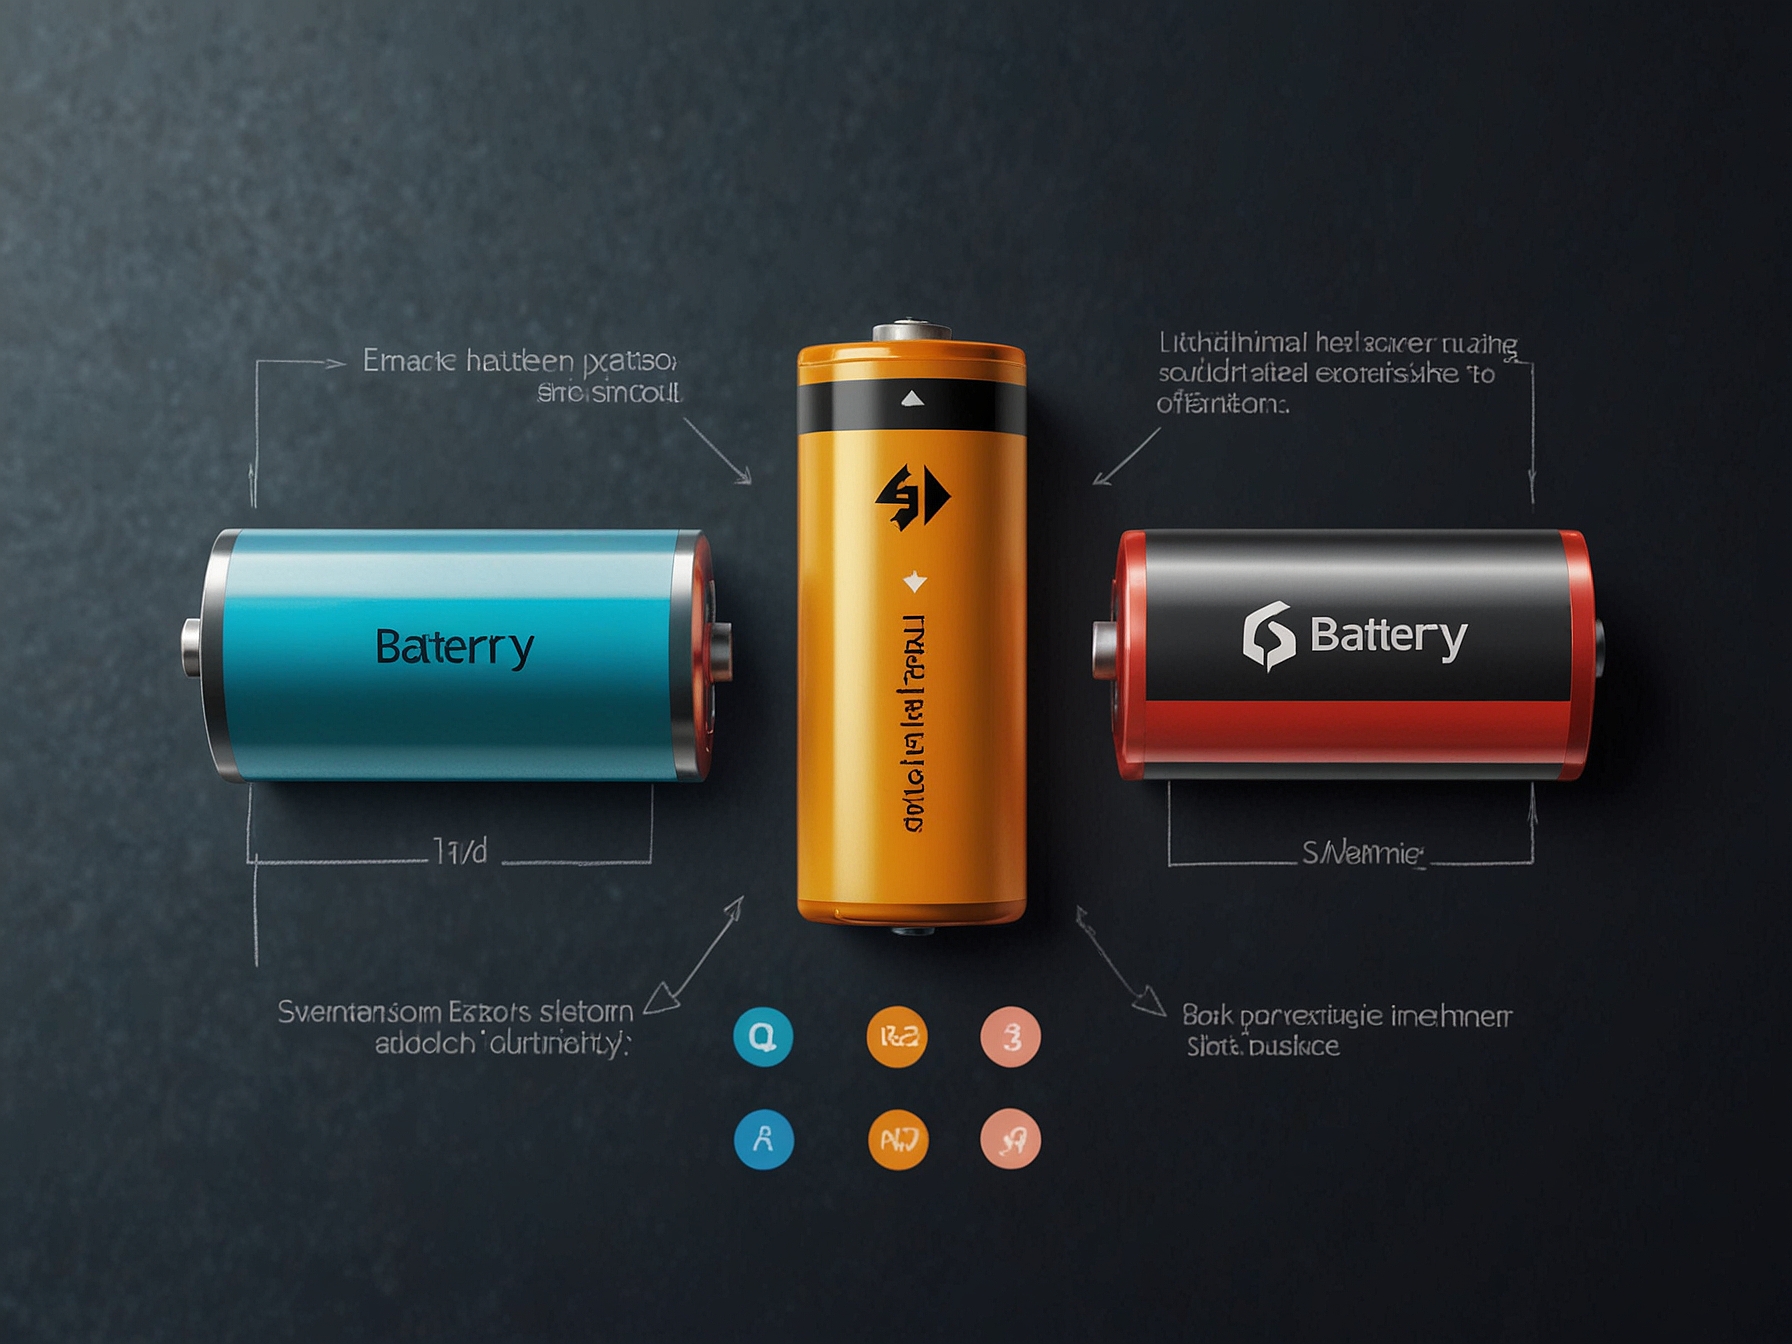 An advanced diagram illustrating the inner components of a solid-state battery compared to a conventional lithium-ion battery, highlighting the benefits like higher energy density and safety.